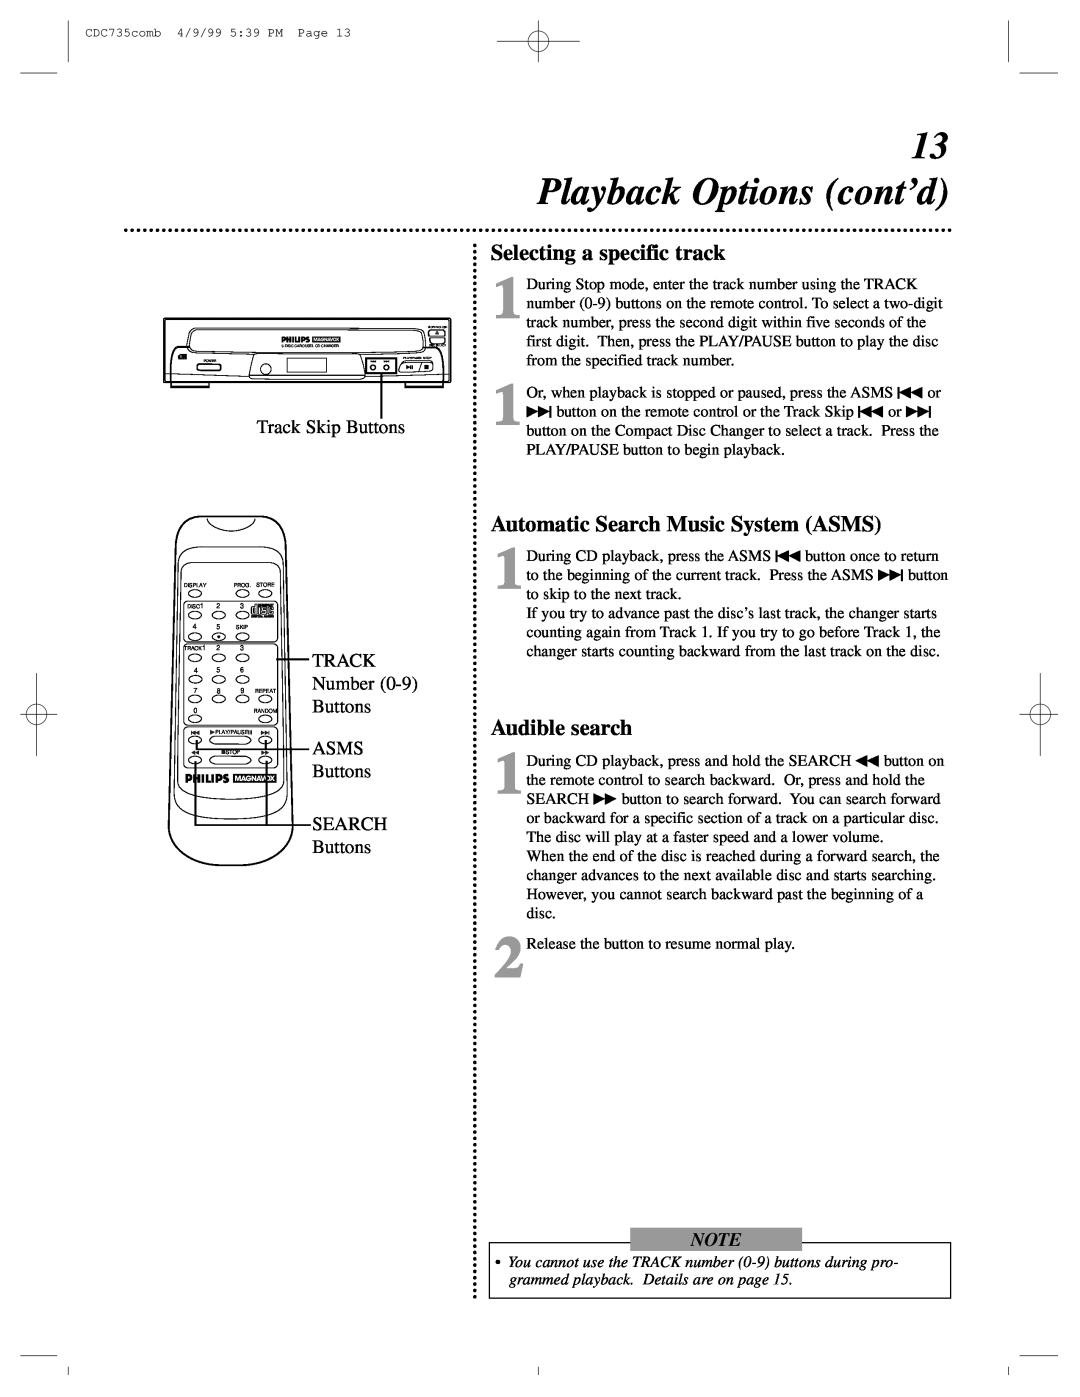 Philips CDC735 Playback Options cont’d, Selecting a specific track, Automatic Search Music System ASMS, Audible search 